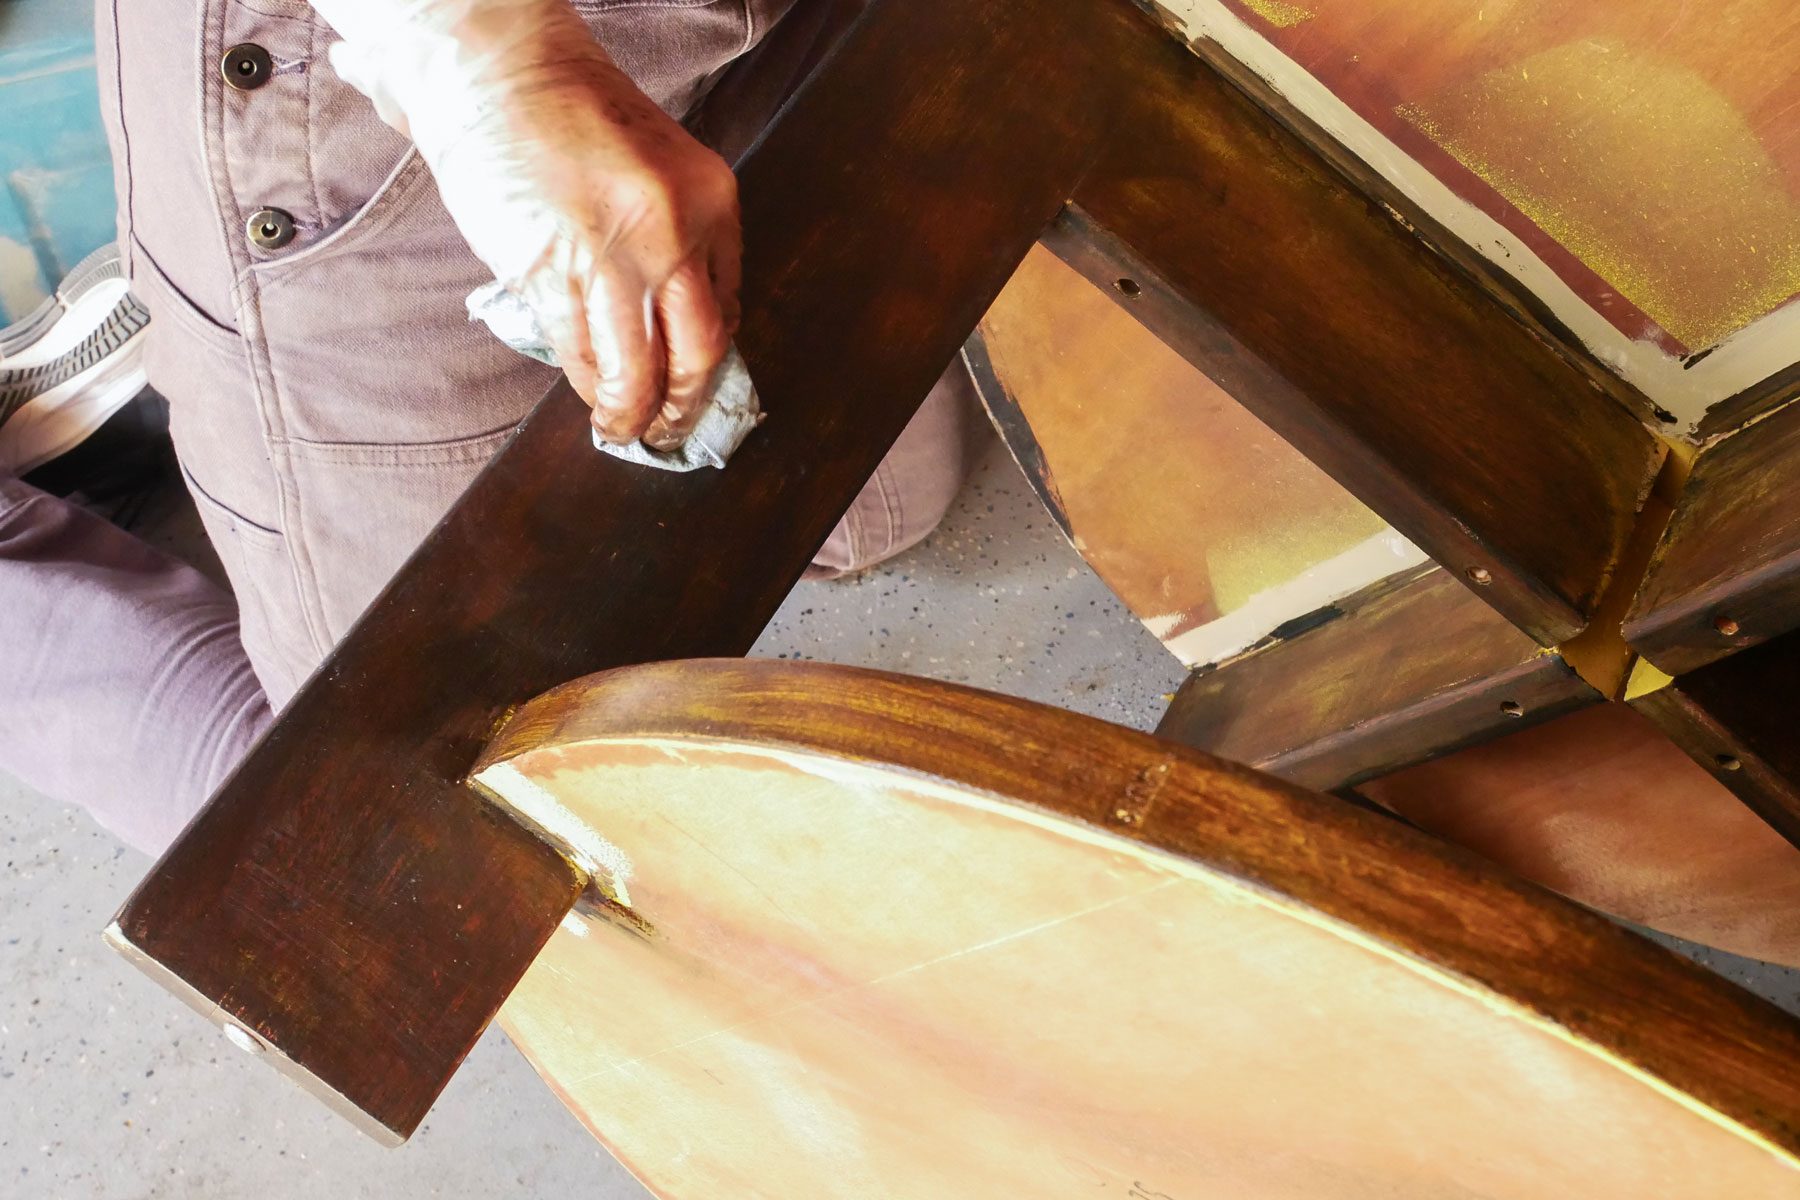 A person Apply wax topcoat on a wooden table